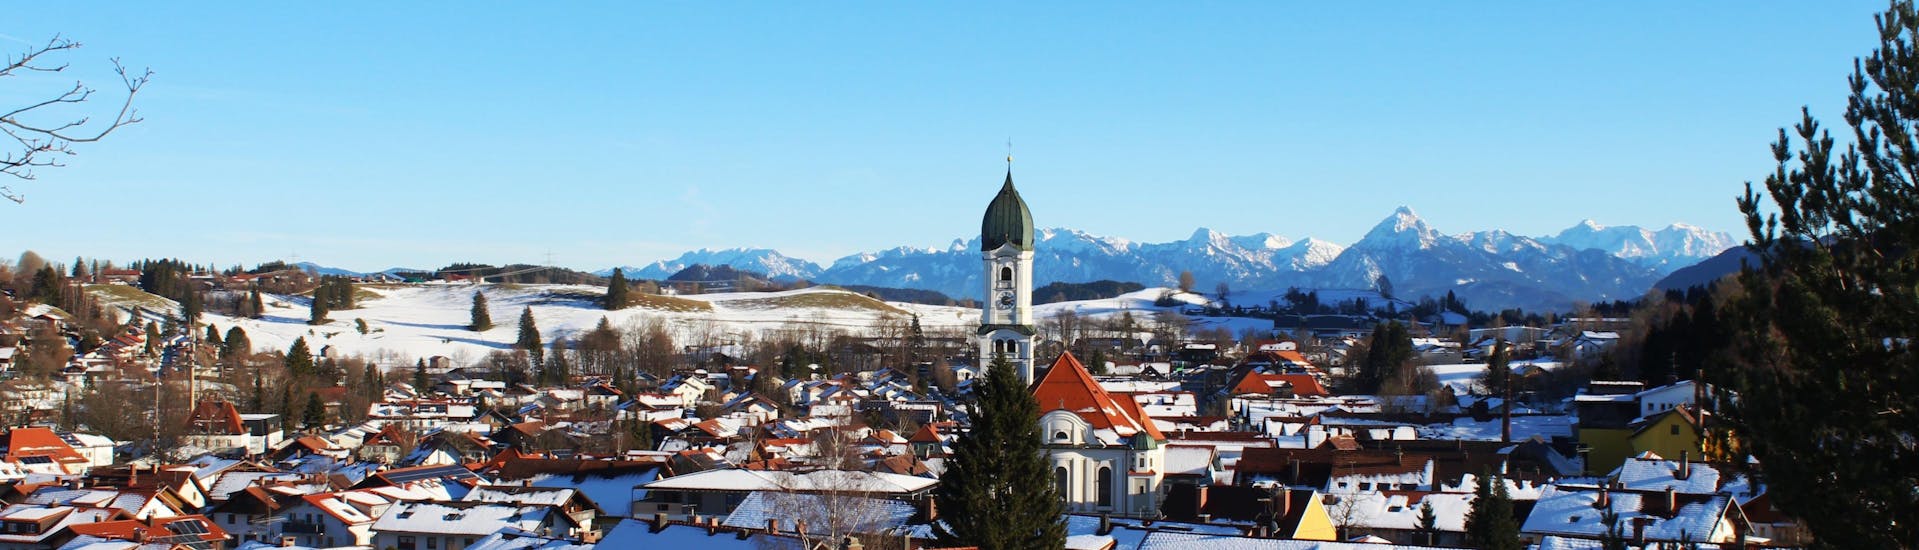 Town of Nesselwang covered in snow near the slopes.